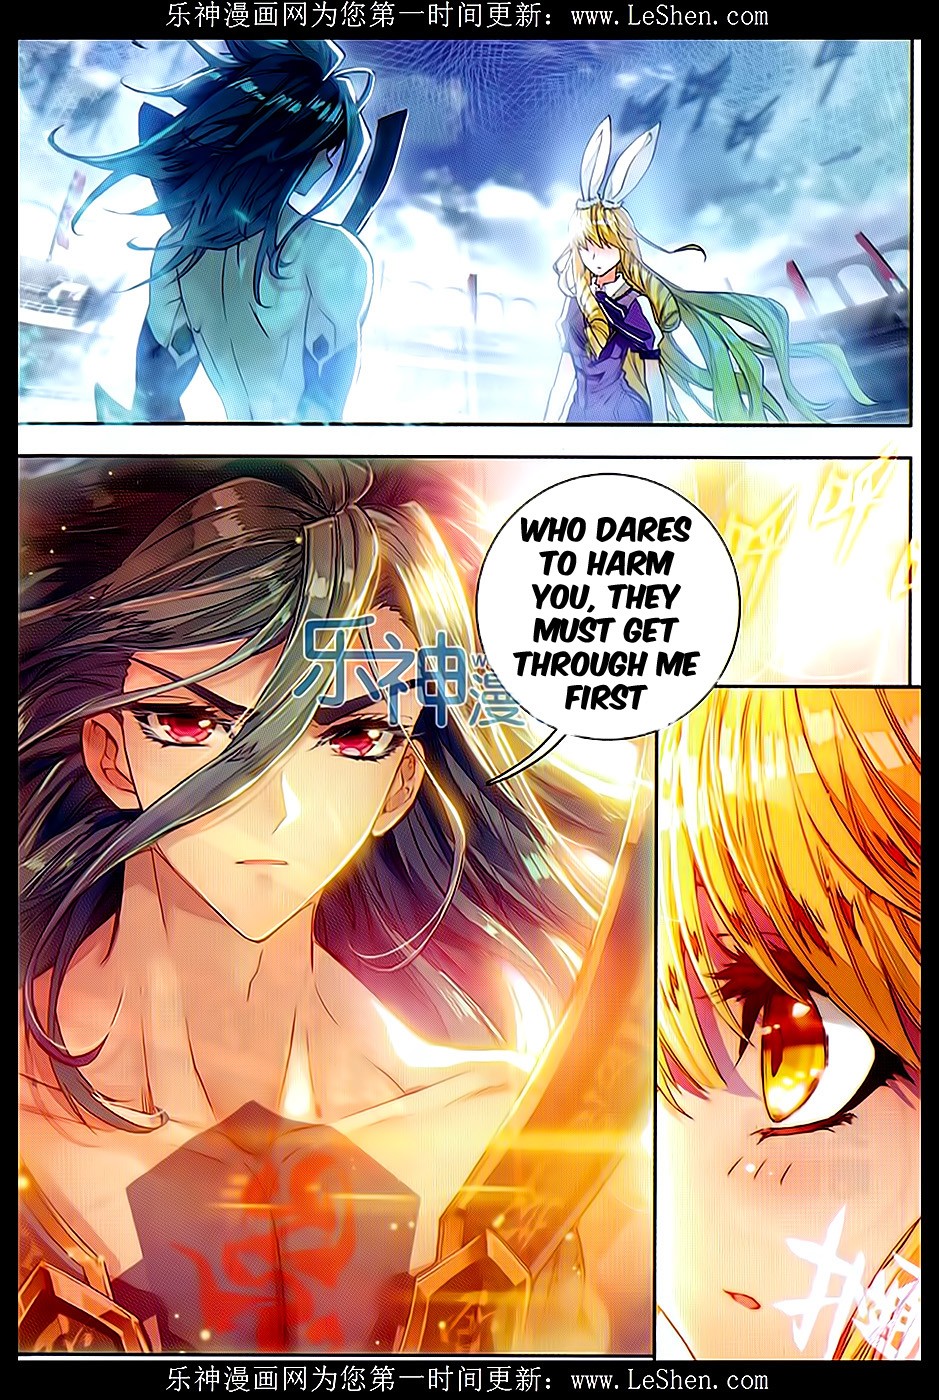 Soul Land II The Peerless Tang Sect Ch. 68